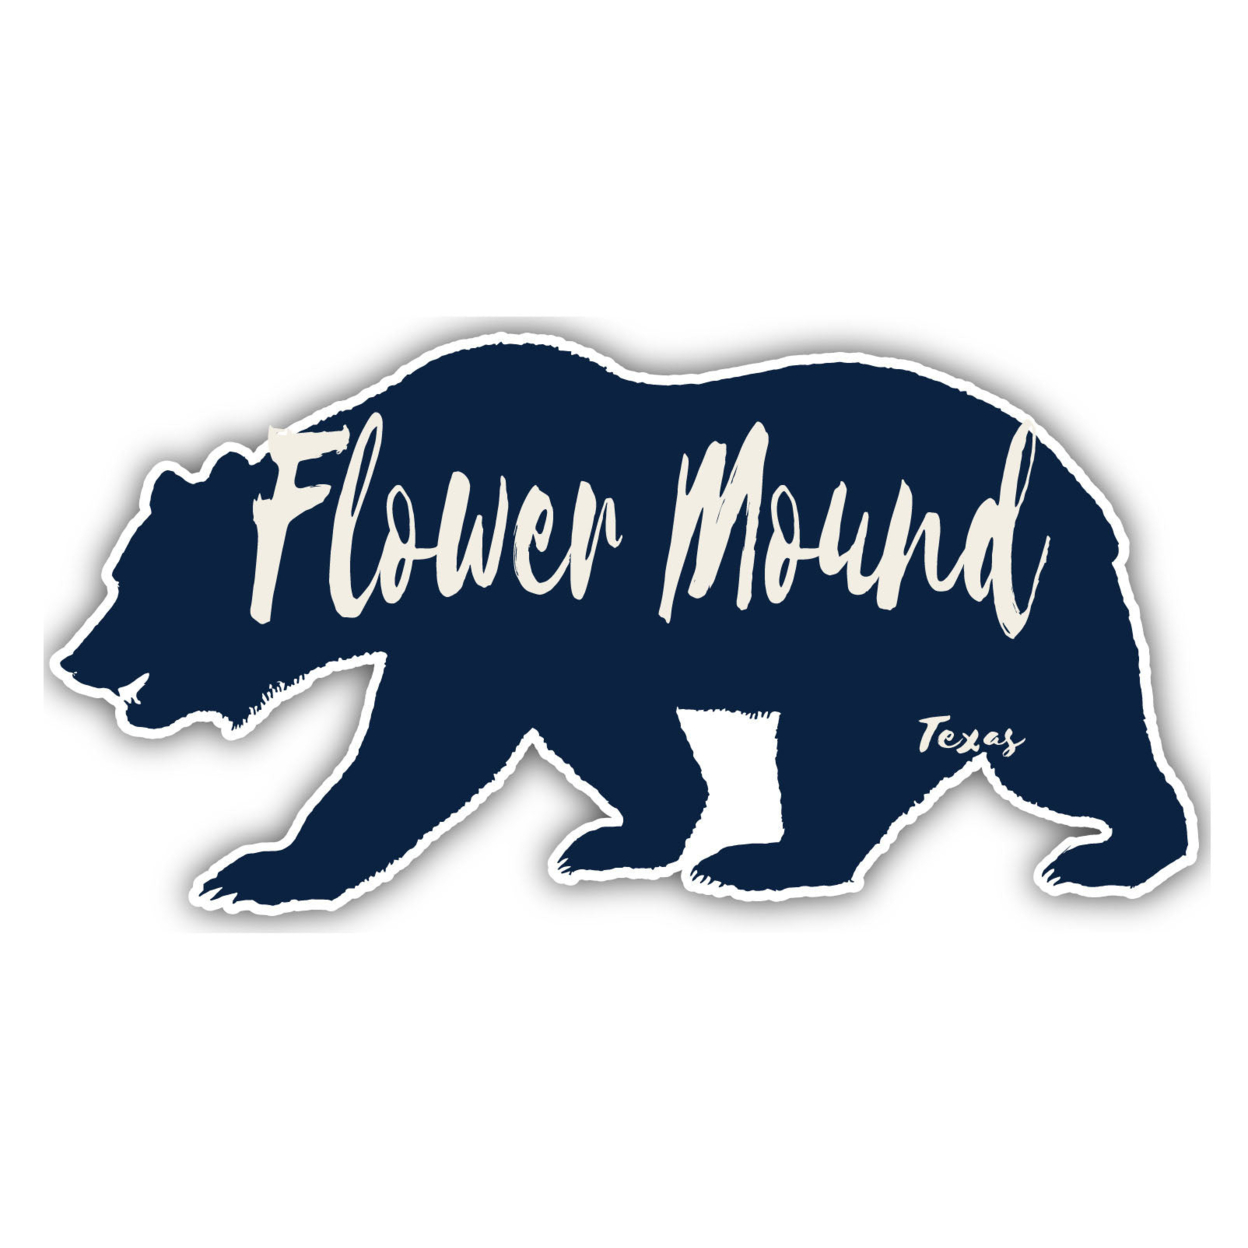 Flower Mound Texas Souvenir Decorative Stickers (Choose Theme And Size) - 4-Pack, 12-Inch, Bear